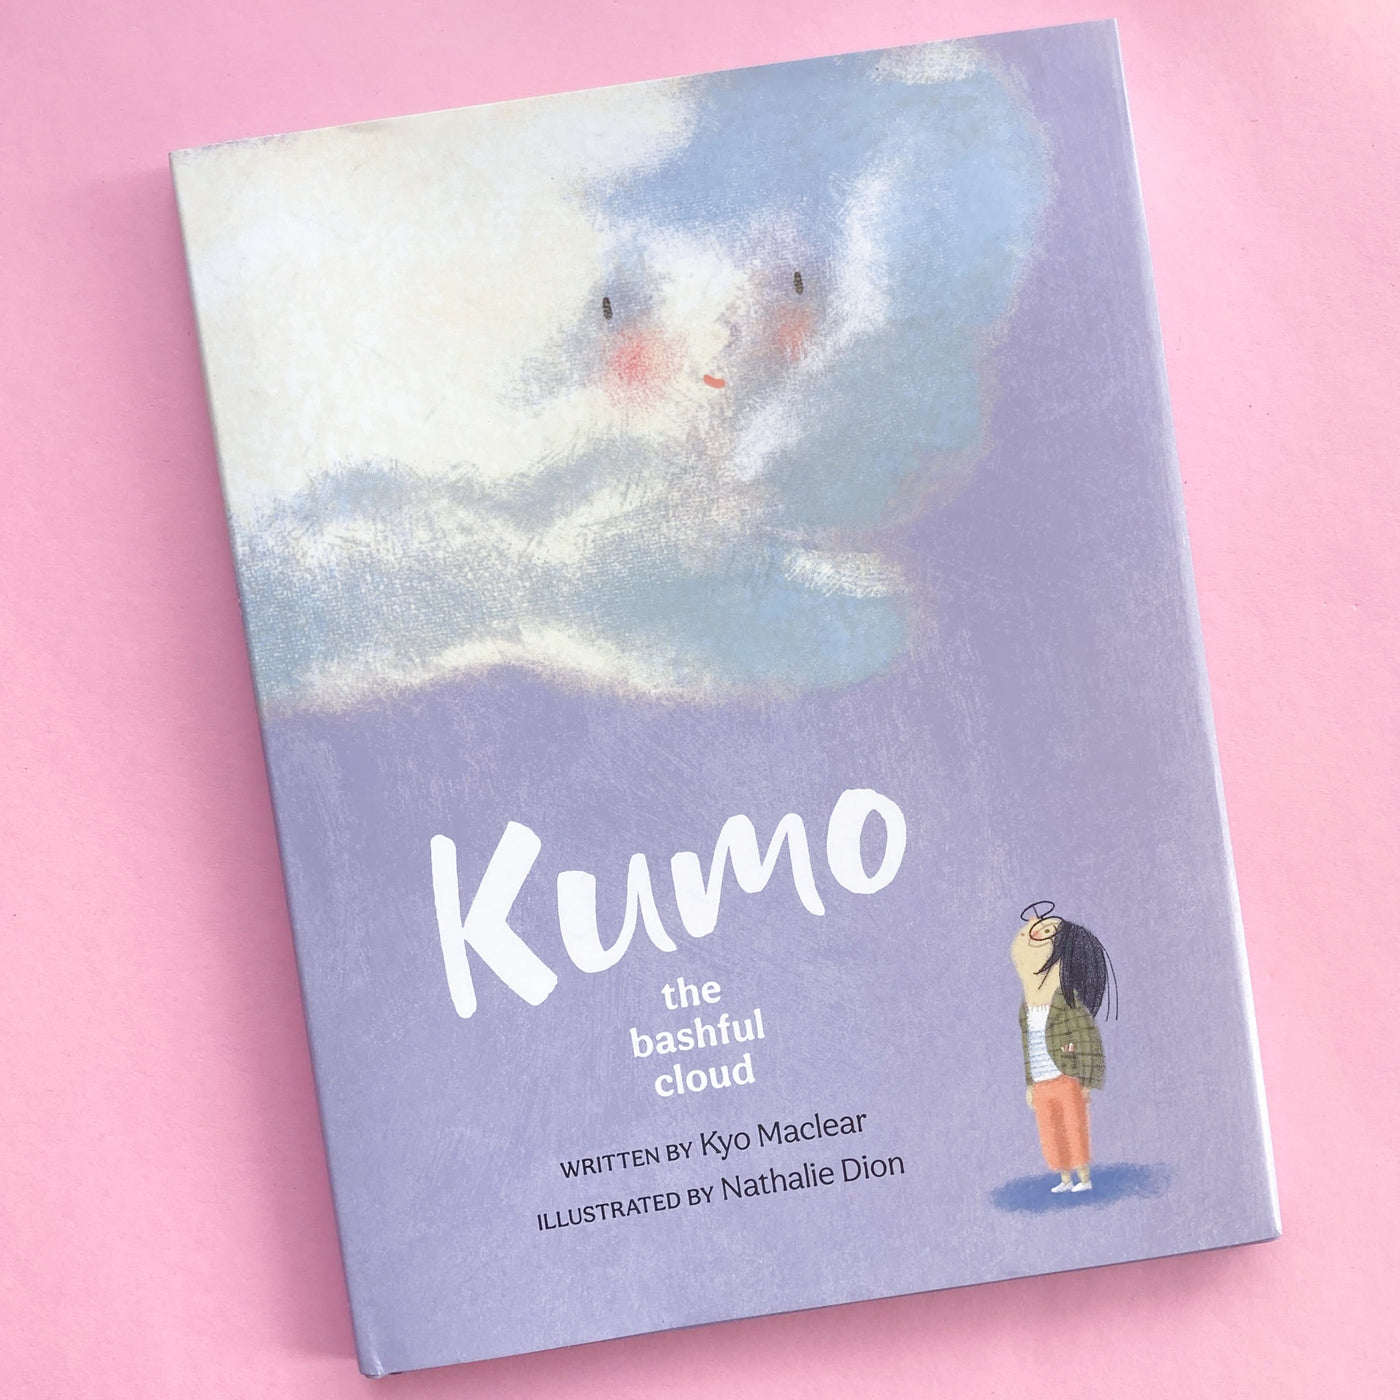 Kumo: The Bashful Cloud by Kyo Maclear and Nathalie Dion